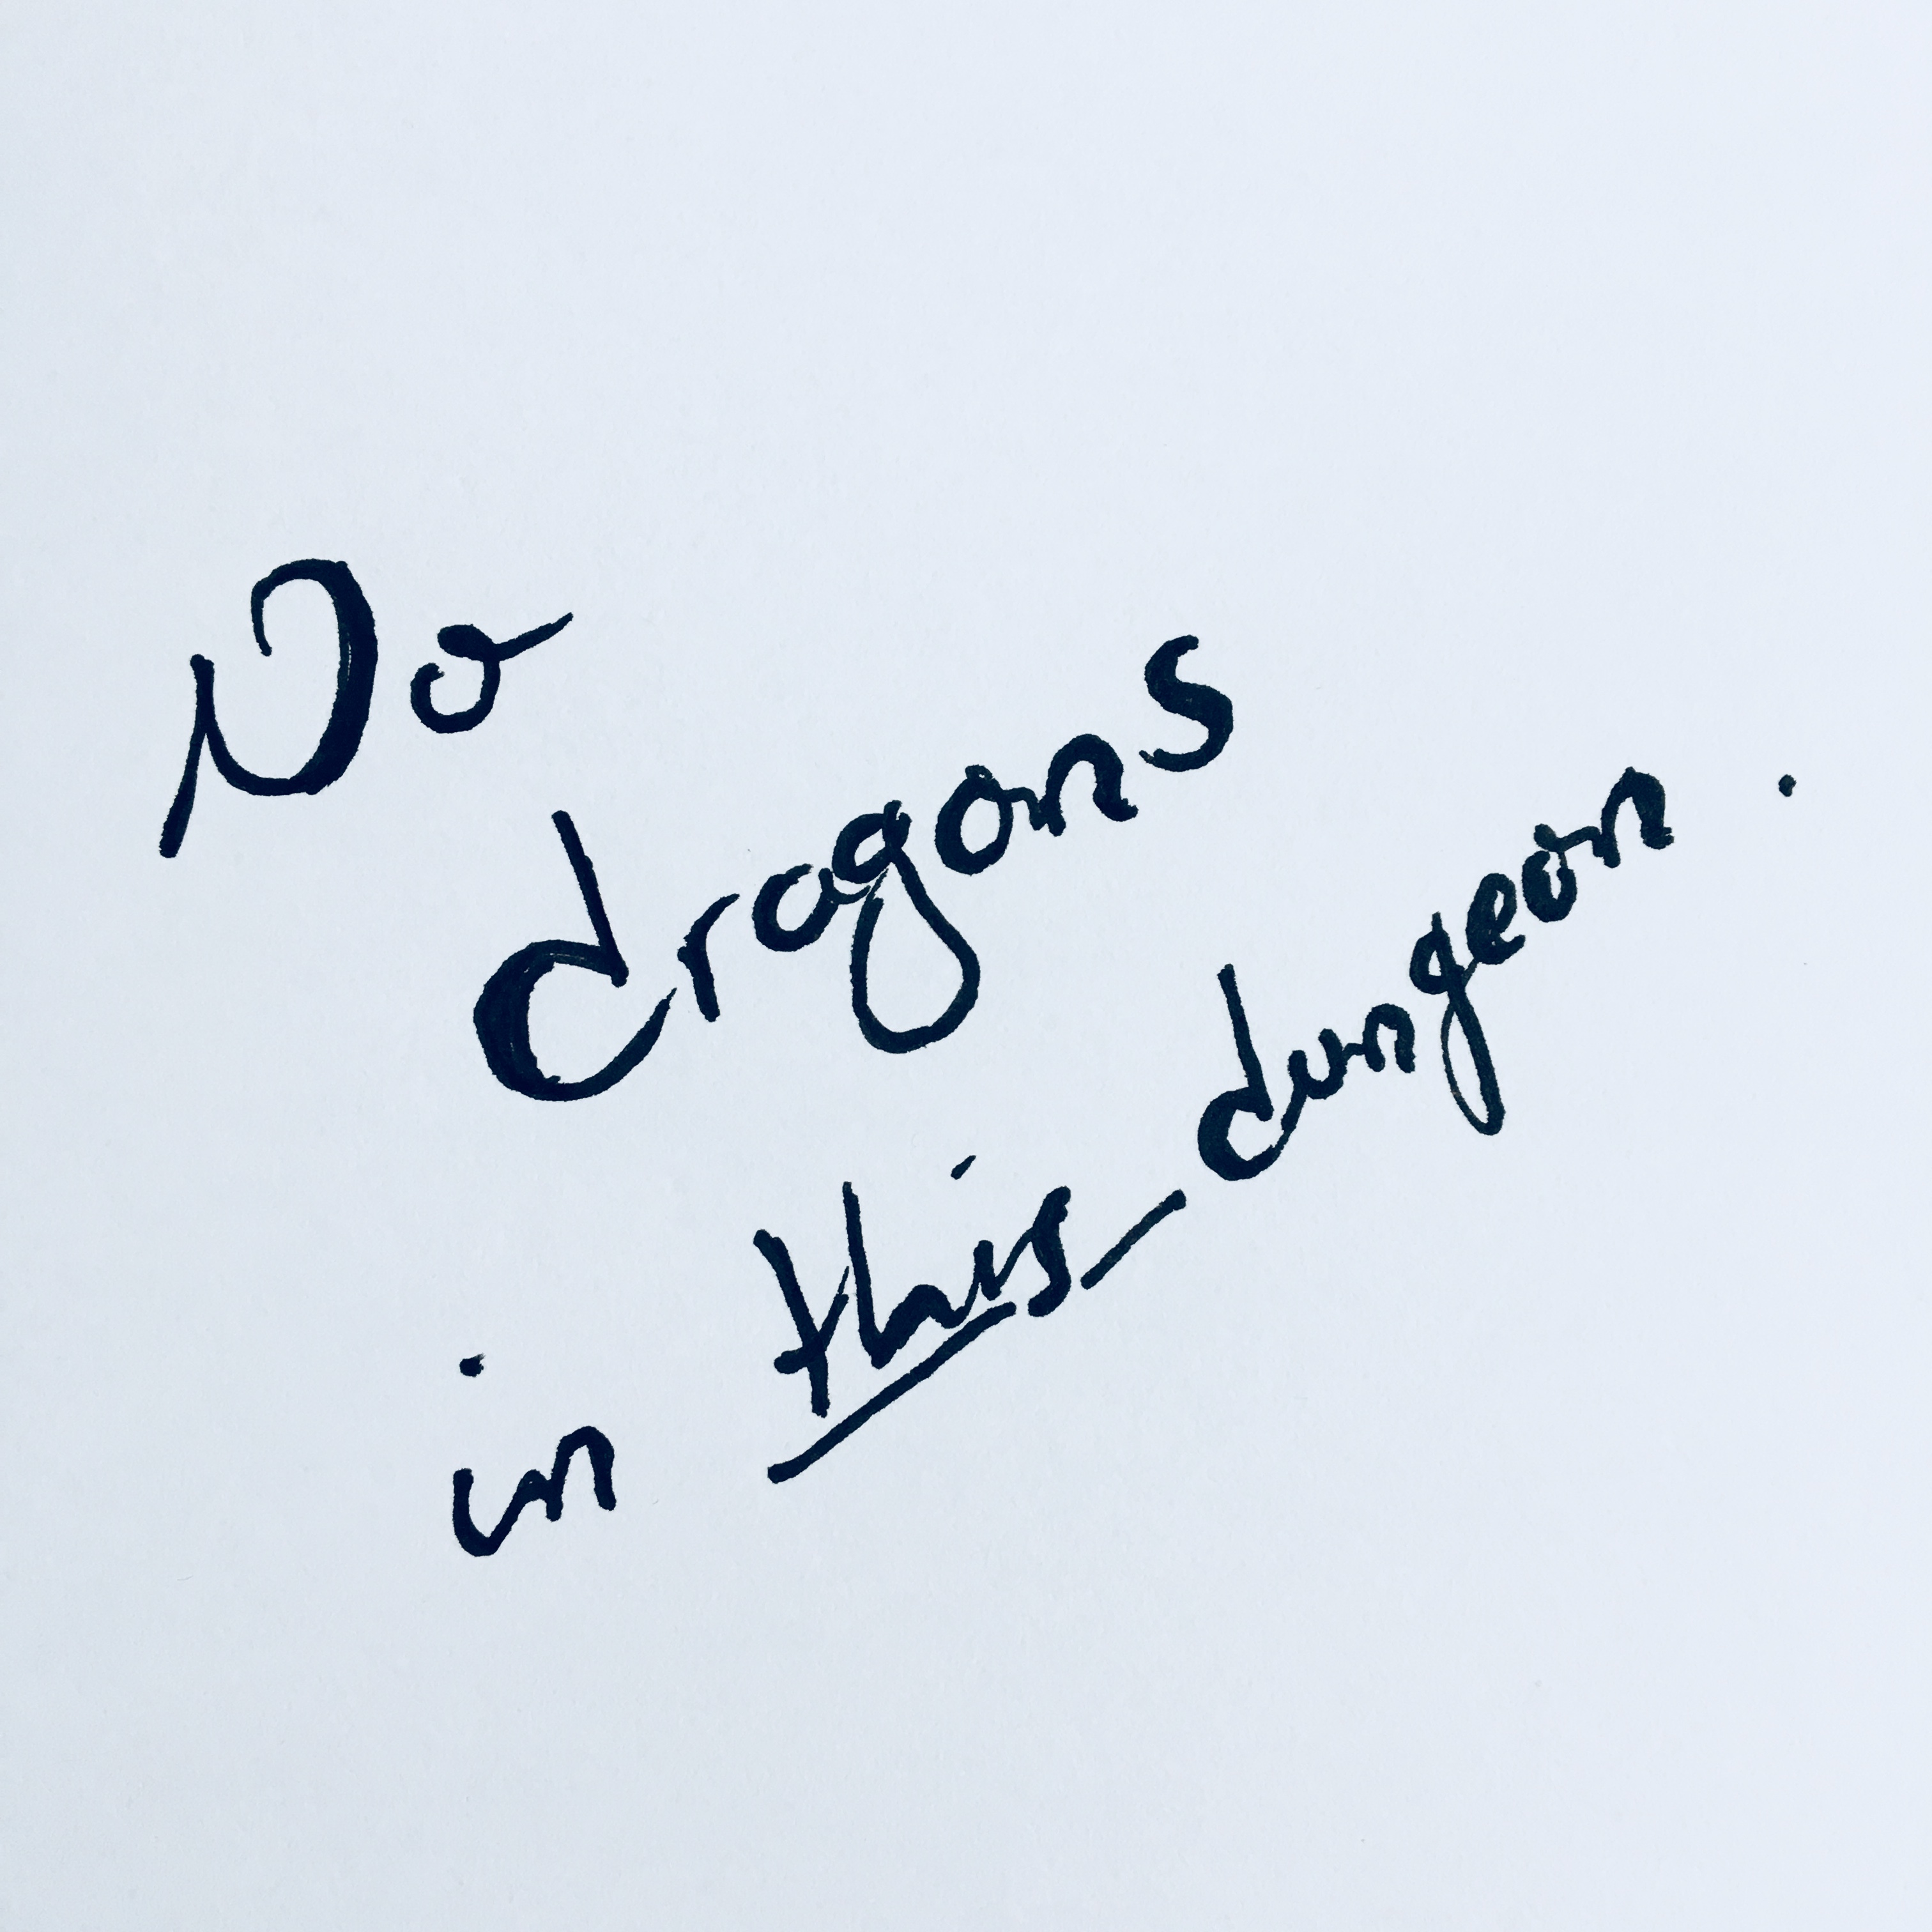 No dragons in this dungeon.